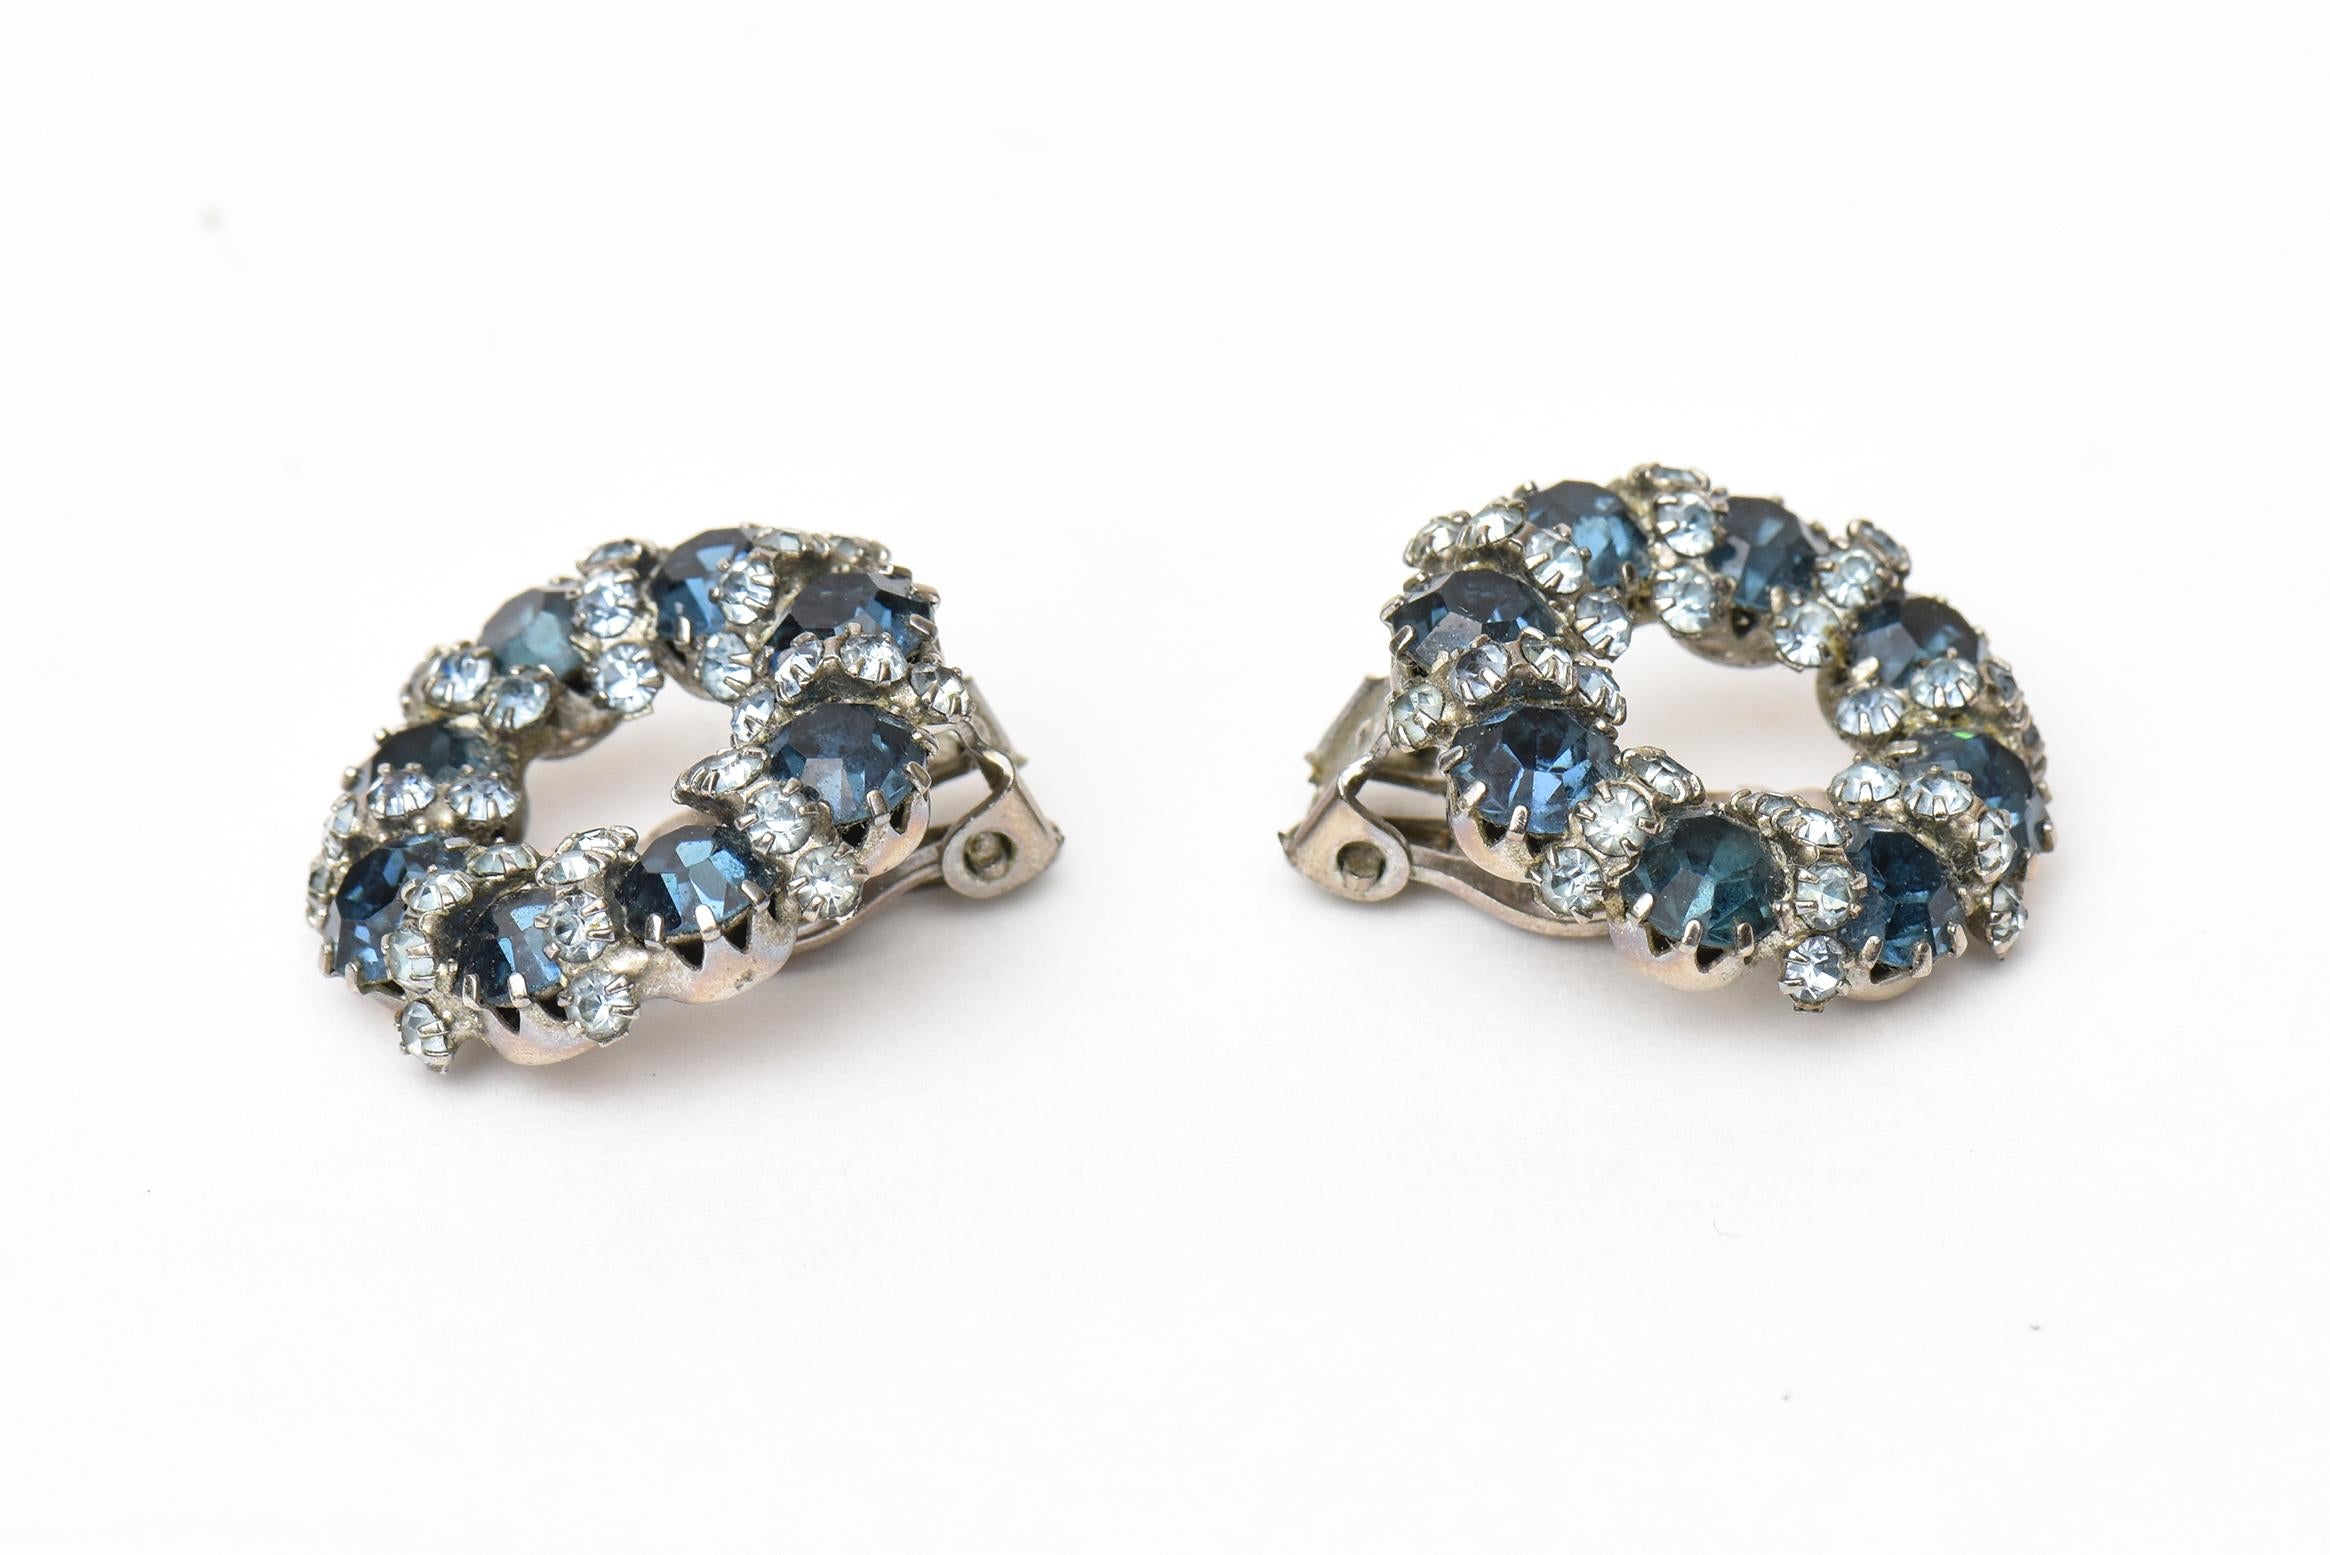 These classic and lovely signed Weiss clip on earrings are vintage from the 50's. The glass and rhinestones are beautiful shades of light and darker blue hues. Dress them up or down. Always to be well dressed and adorned. Even great with jeans. They